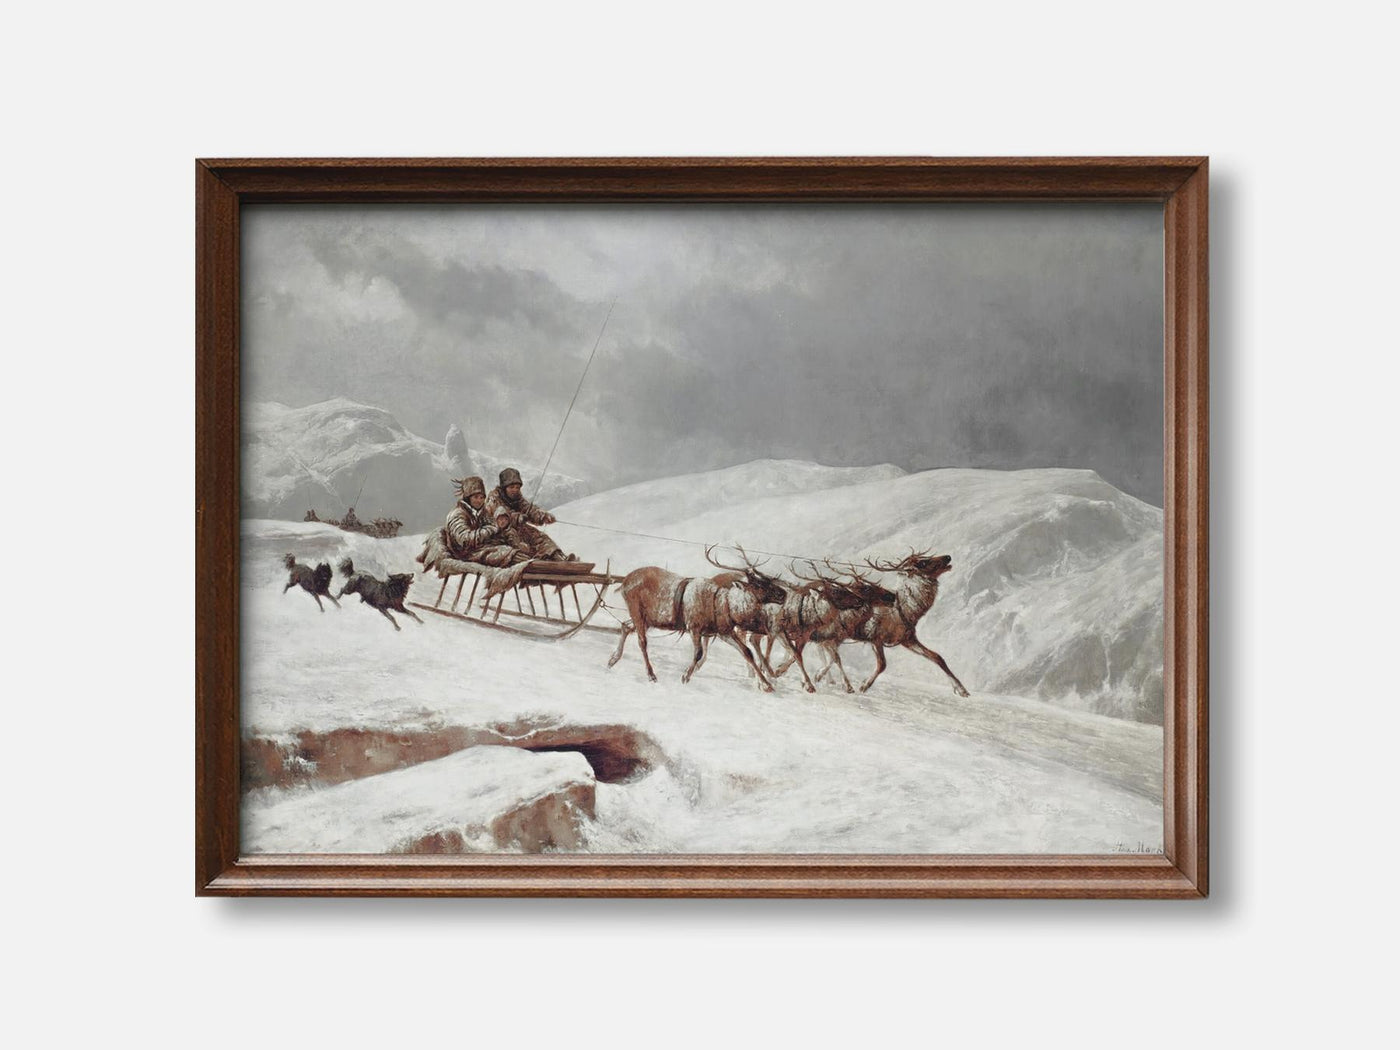 Reindeer Sleigh Ride mockup - A_w37-V1-PC_F+WA-SS_1-PS_5x7-C_def variant